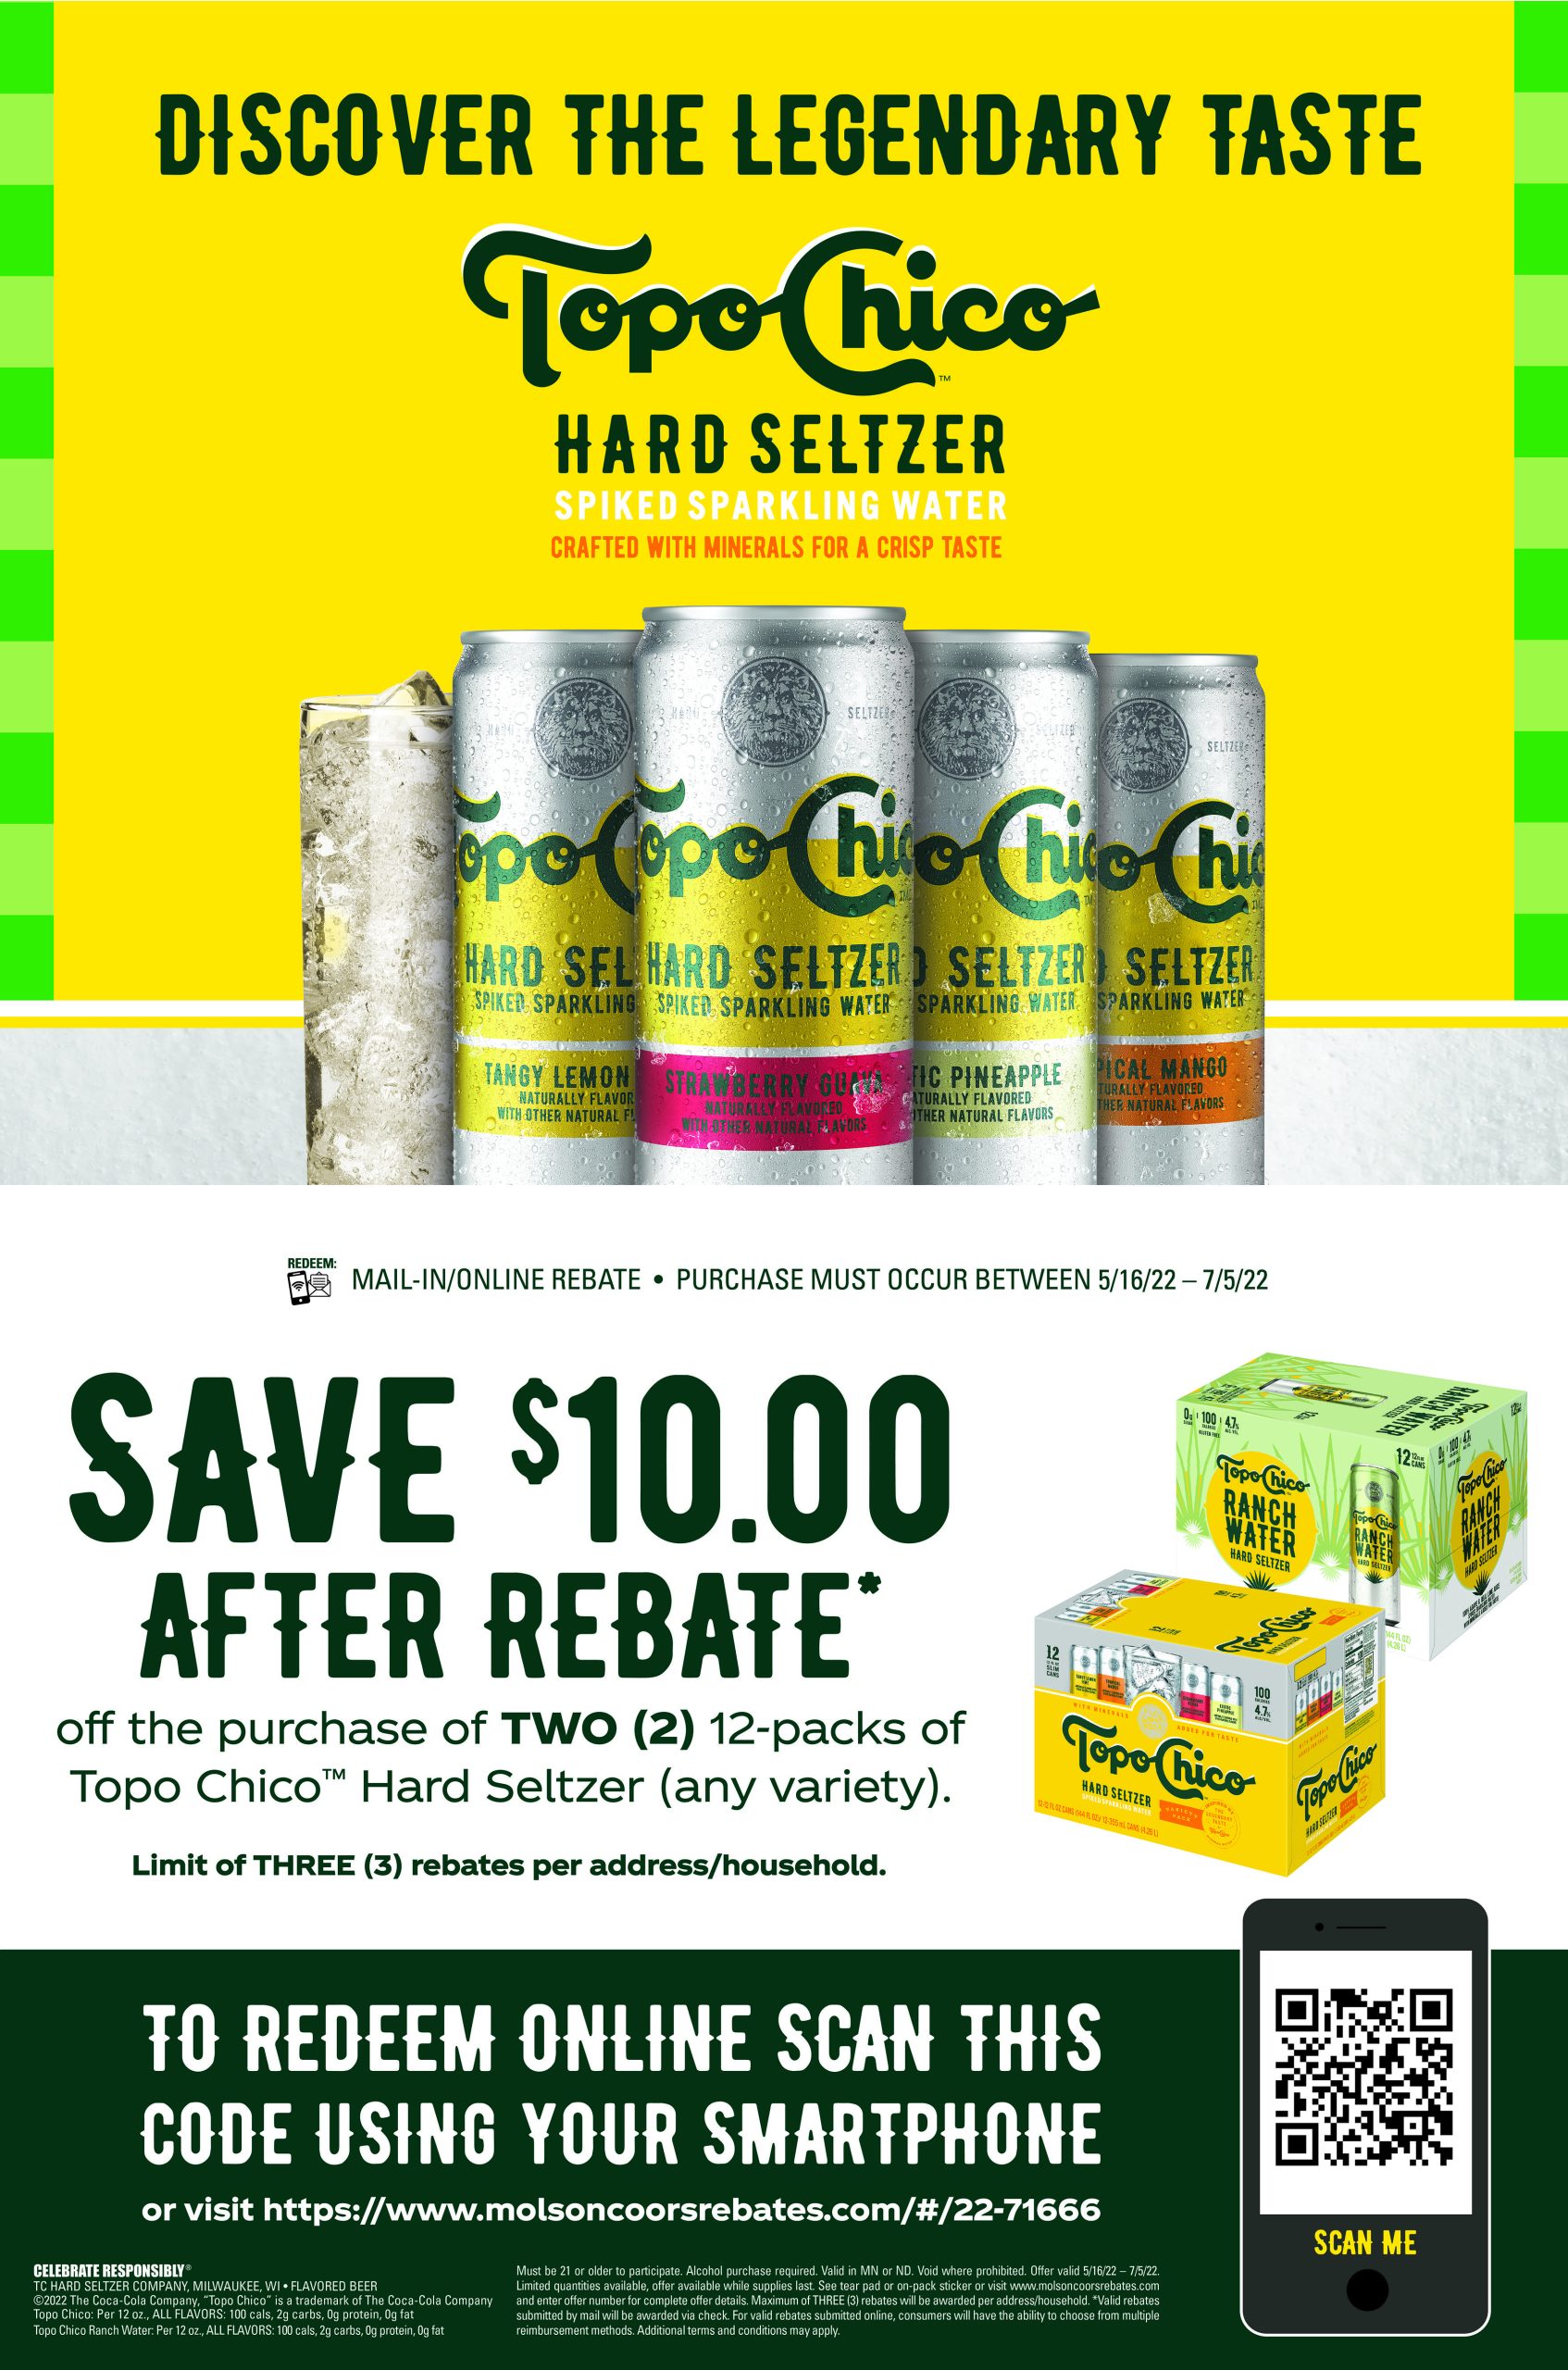 topo-chico-hard-seltzer-promo-bolo-tie-reusable-drinking-straw-n-official-store